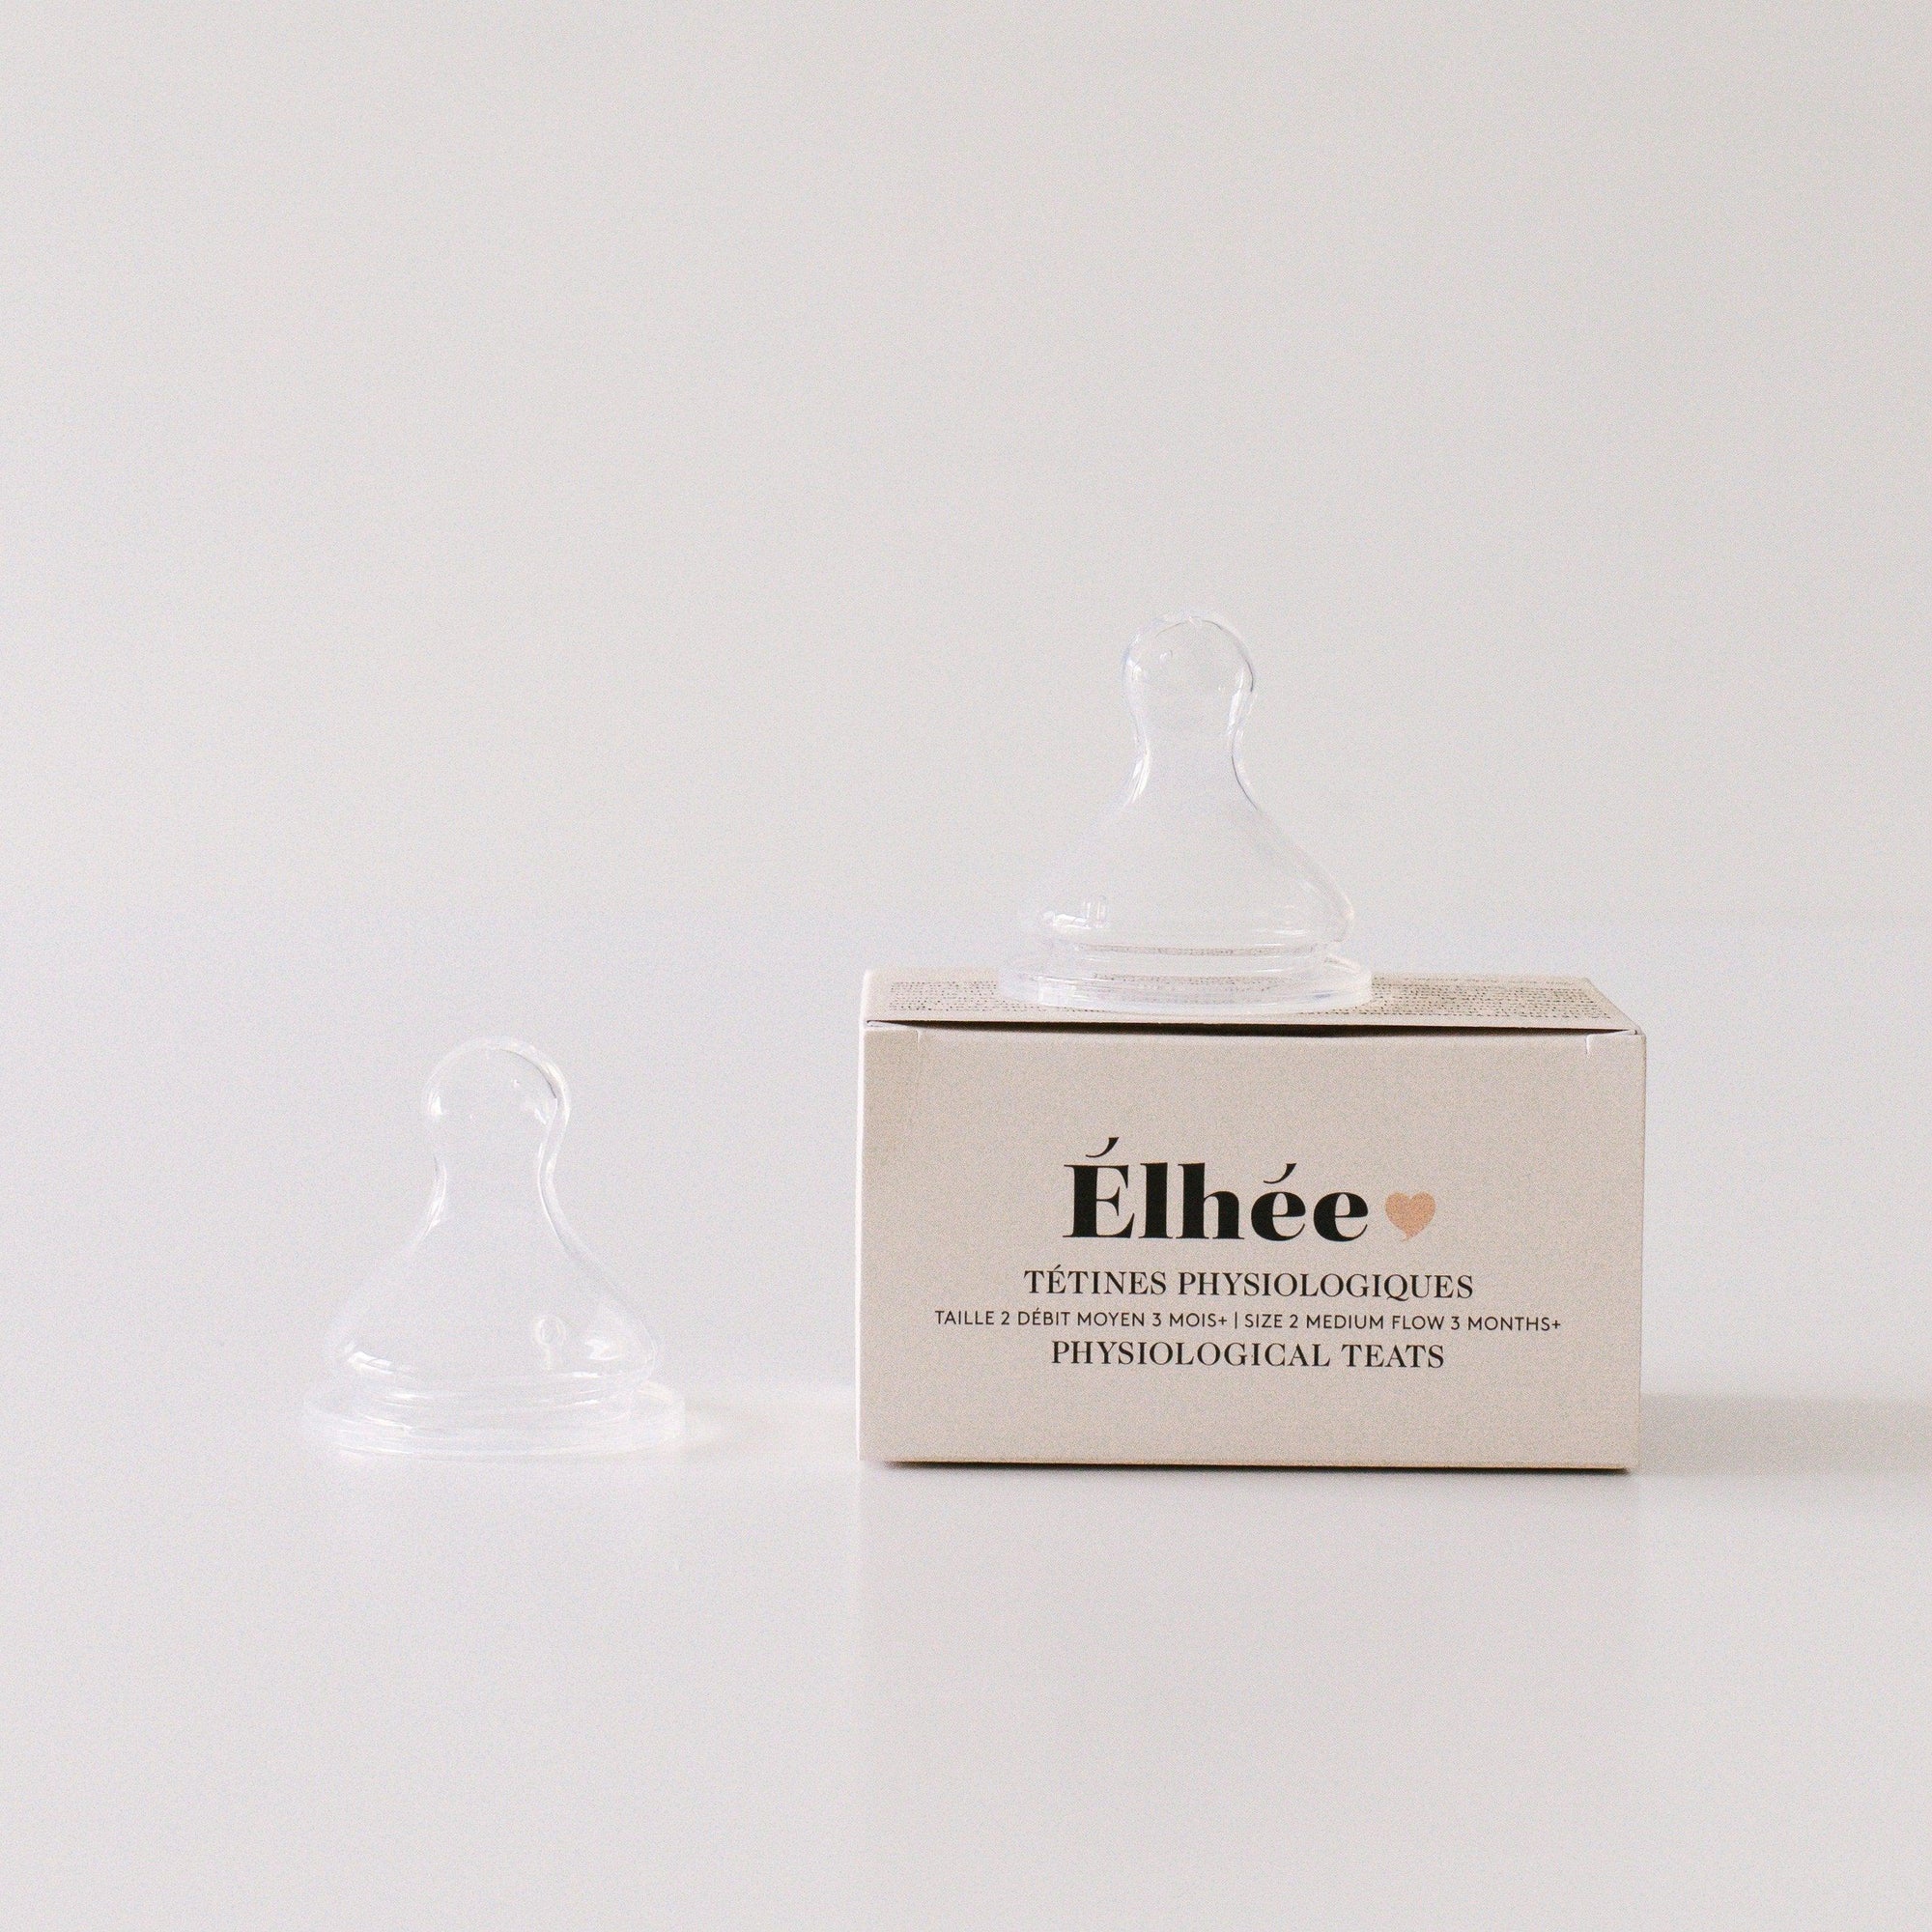 A set of Elhee France slow flow teats sitting next to their box against a white background.